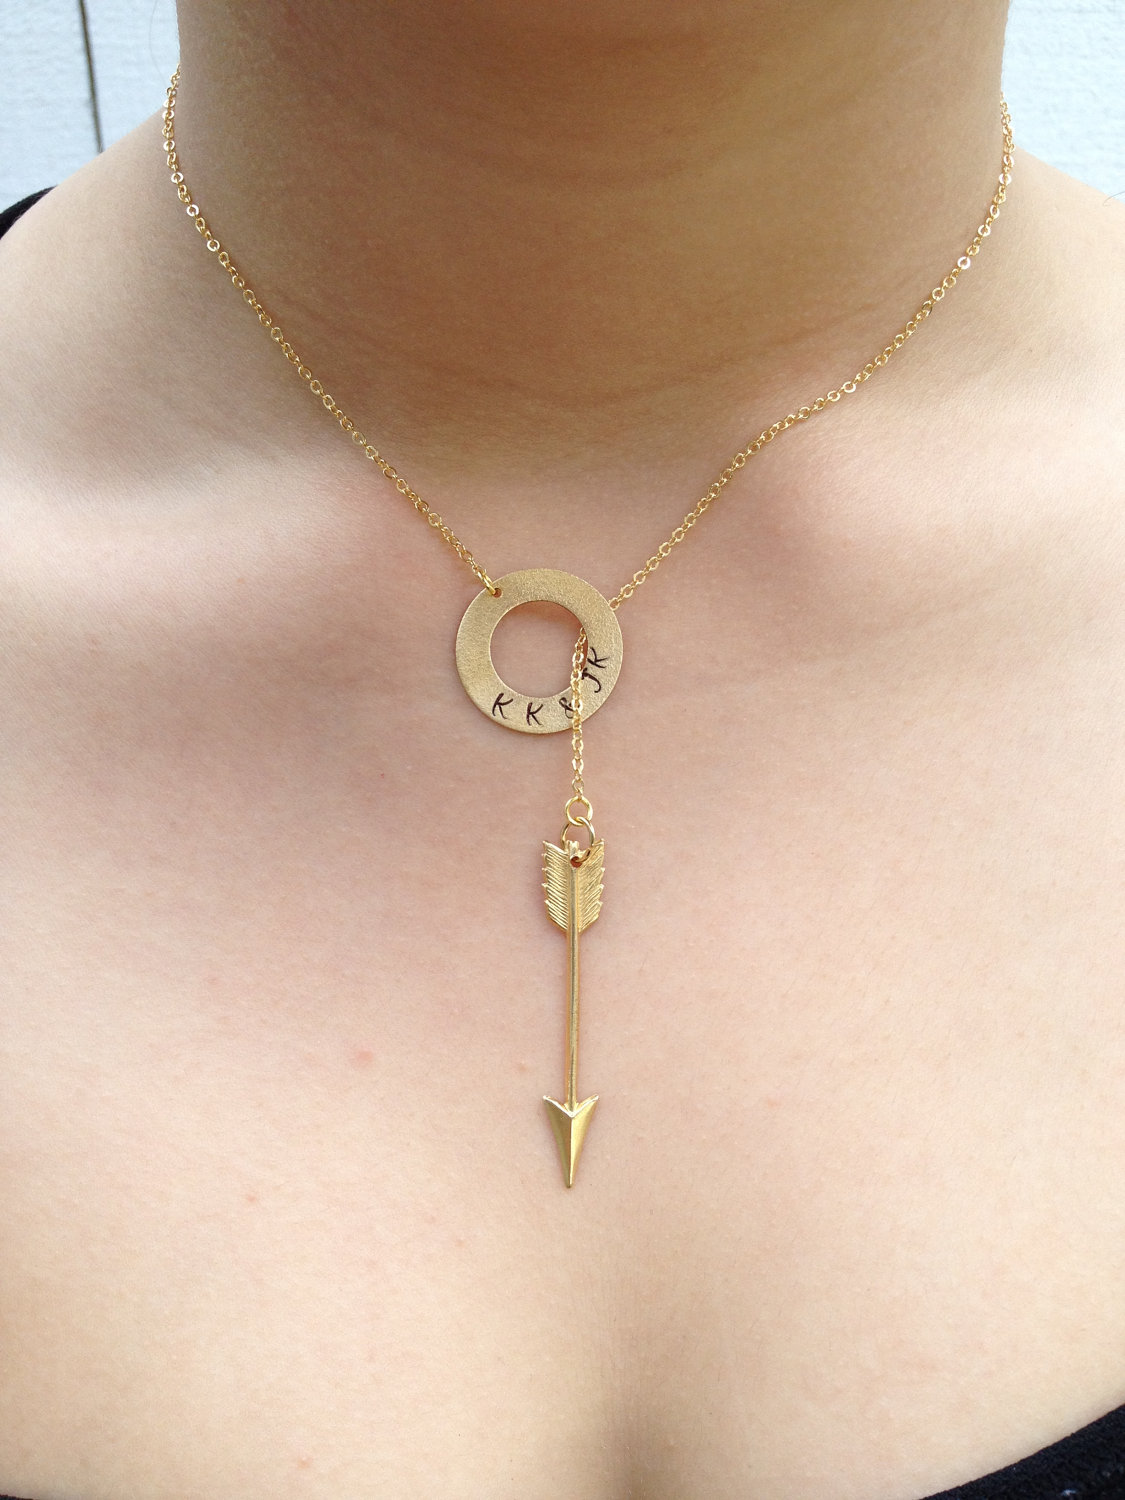 Personalized Gold Piercing Arrow Lariat Necklace